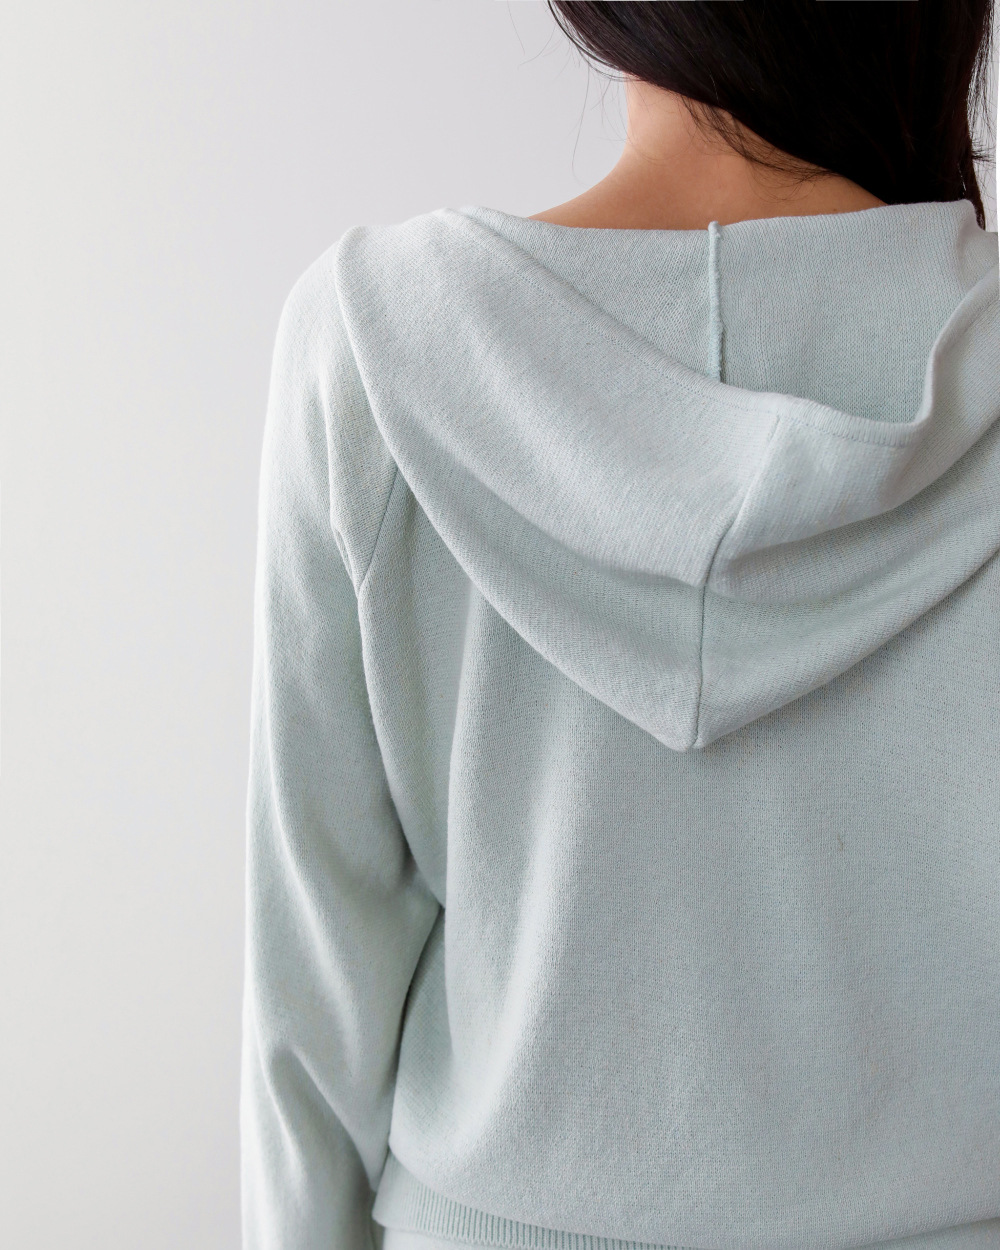 long sleeved tee detail image-S1L26